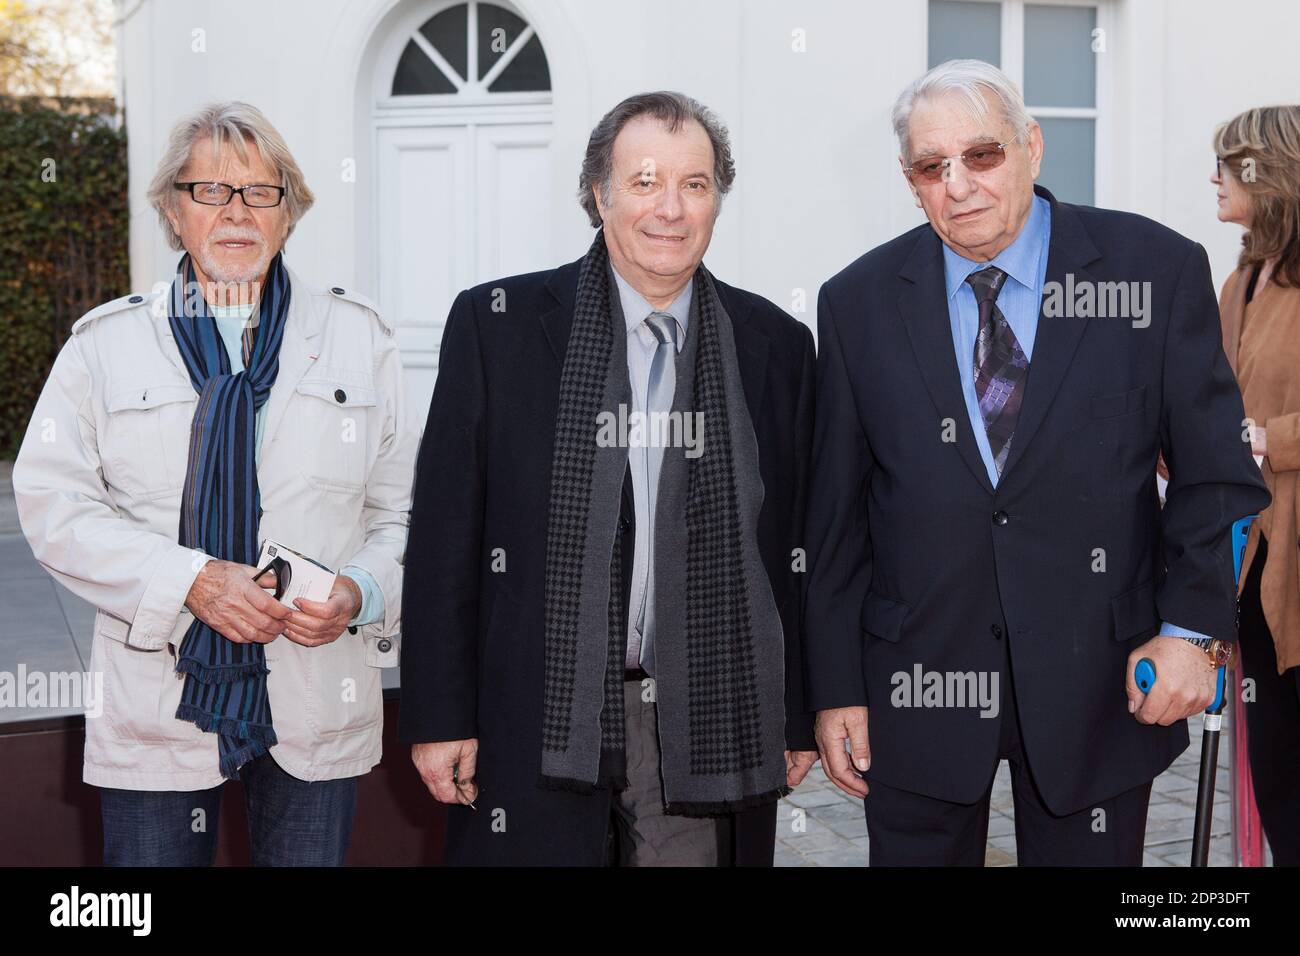 Michel Le Royer, Daniel Russo and Henri Guybet attending the 5th Birthday Party of Museum Paul Belmondo in Boulogne Billancourt, France, on April 13, 2015. Photo by Audrey Poree/ ABACAPRESS.COM Stock Photo